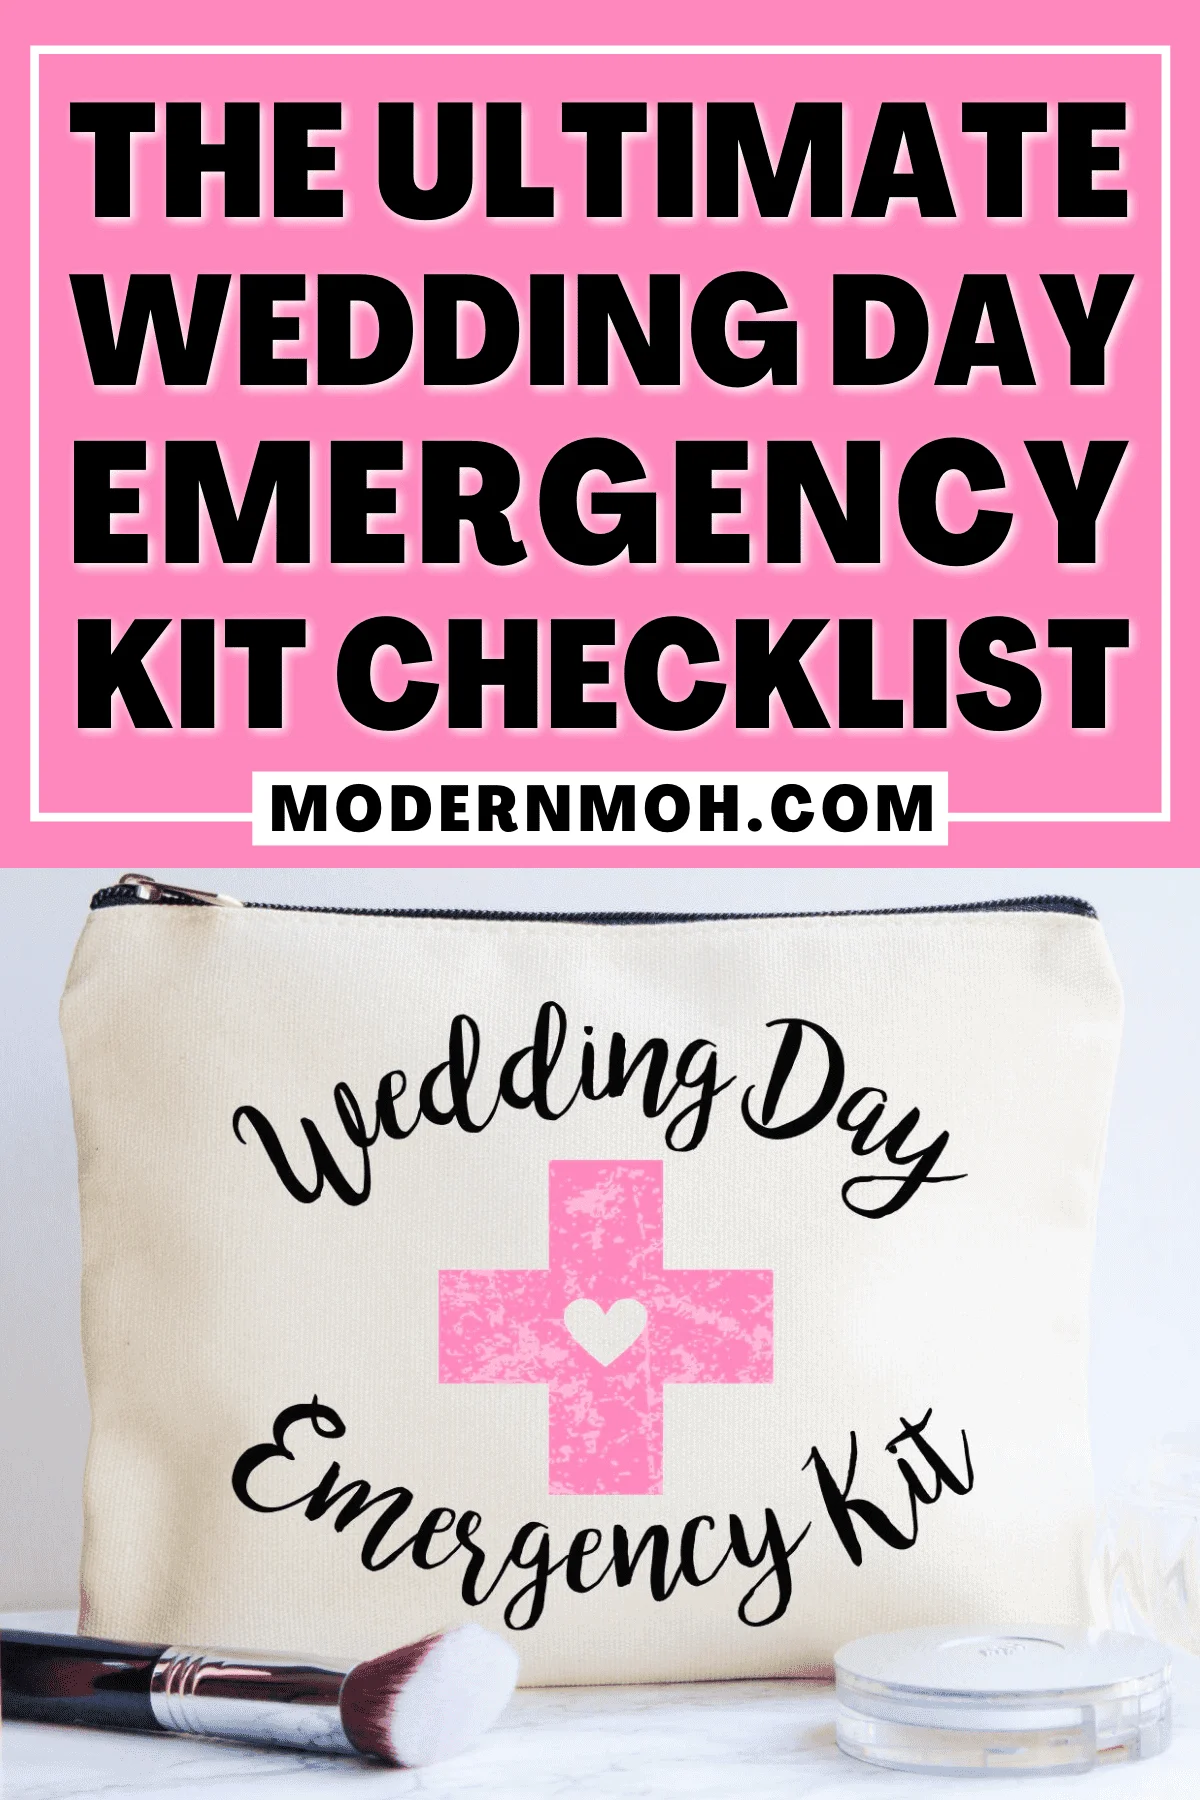 Wedding Day Emergency Kit: Because It’s Better to Be Safe Than Sorry